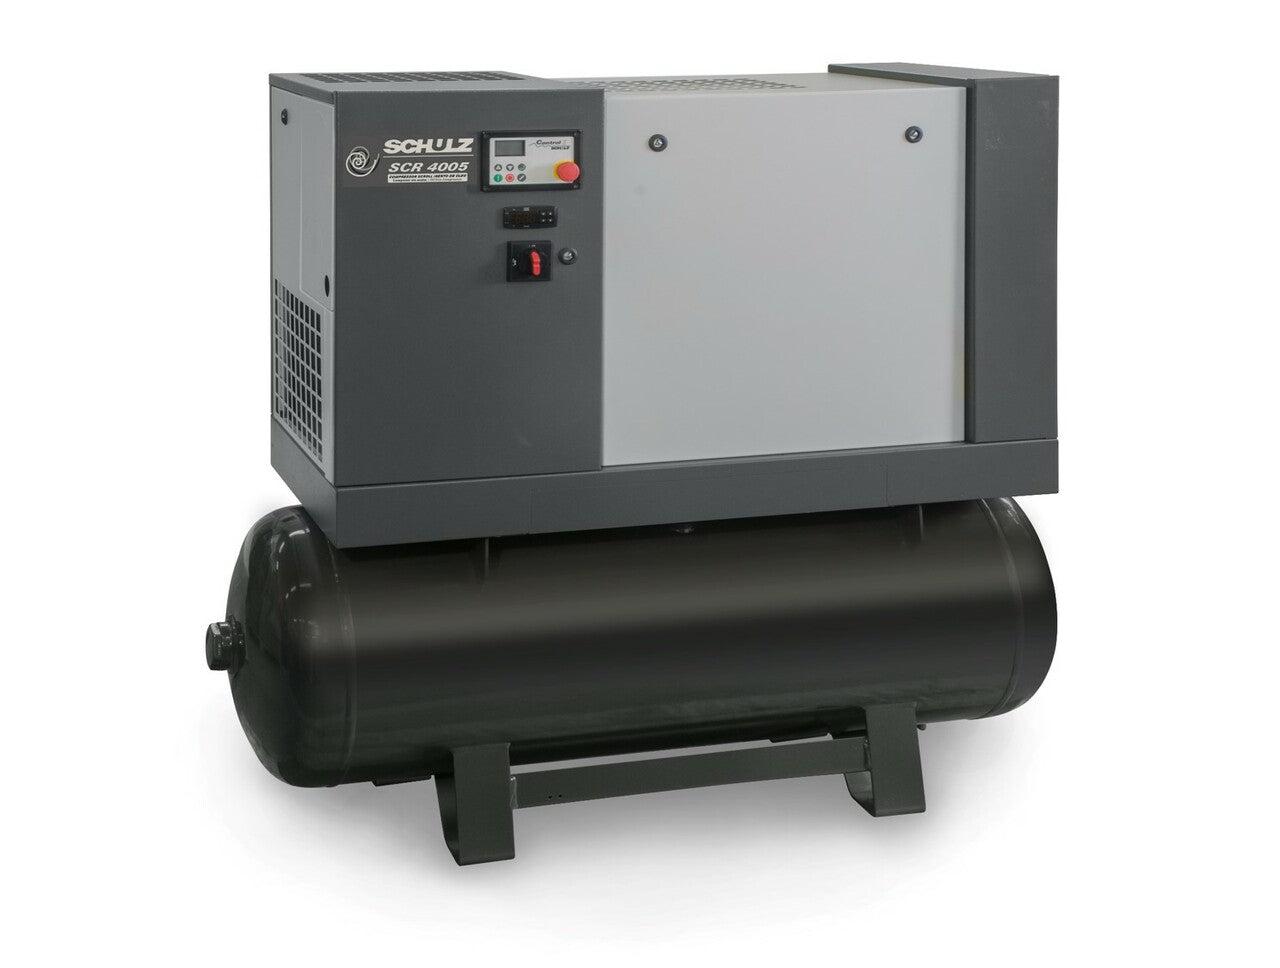 Schulz of America SCR 4005 R 116 PSI @ 12.5 CFM 208-230/460V Three Phase Cabinetized Scroll Compressor - Base Mounted w/ Fan Cooled Aftercooler (PLC Controlled)